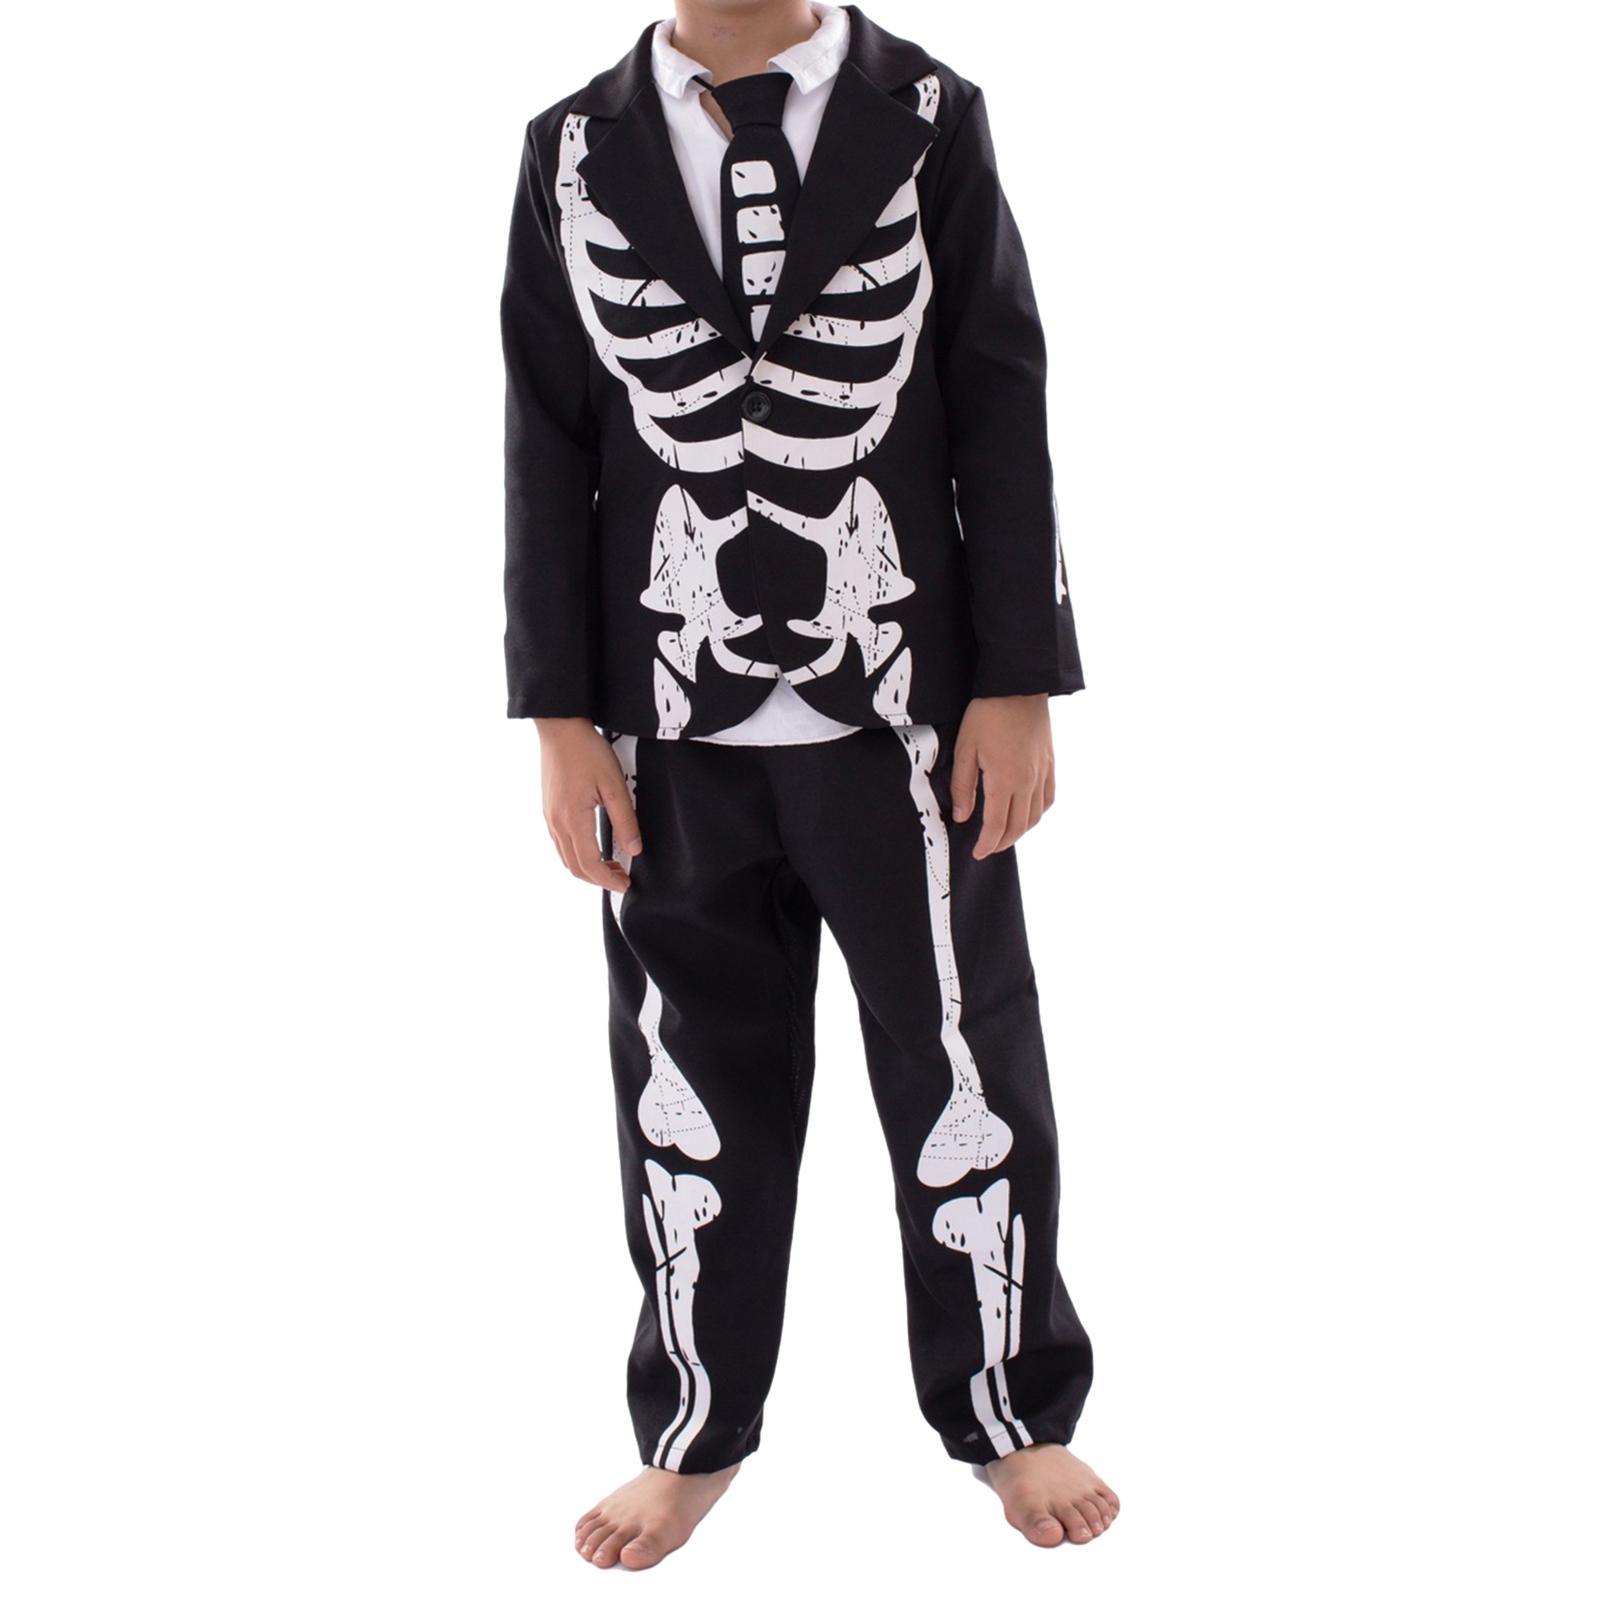 Costume Cosplay Outfit with Pants and Ties, Fancy Dress Halloween suits for Kids